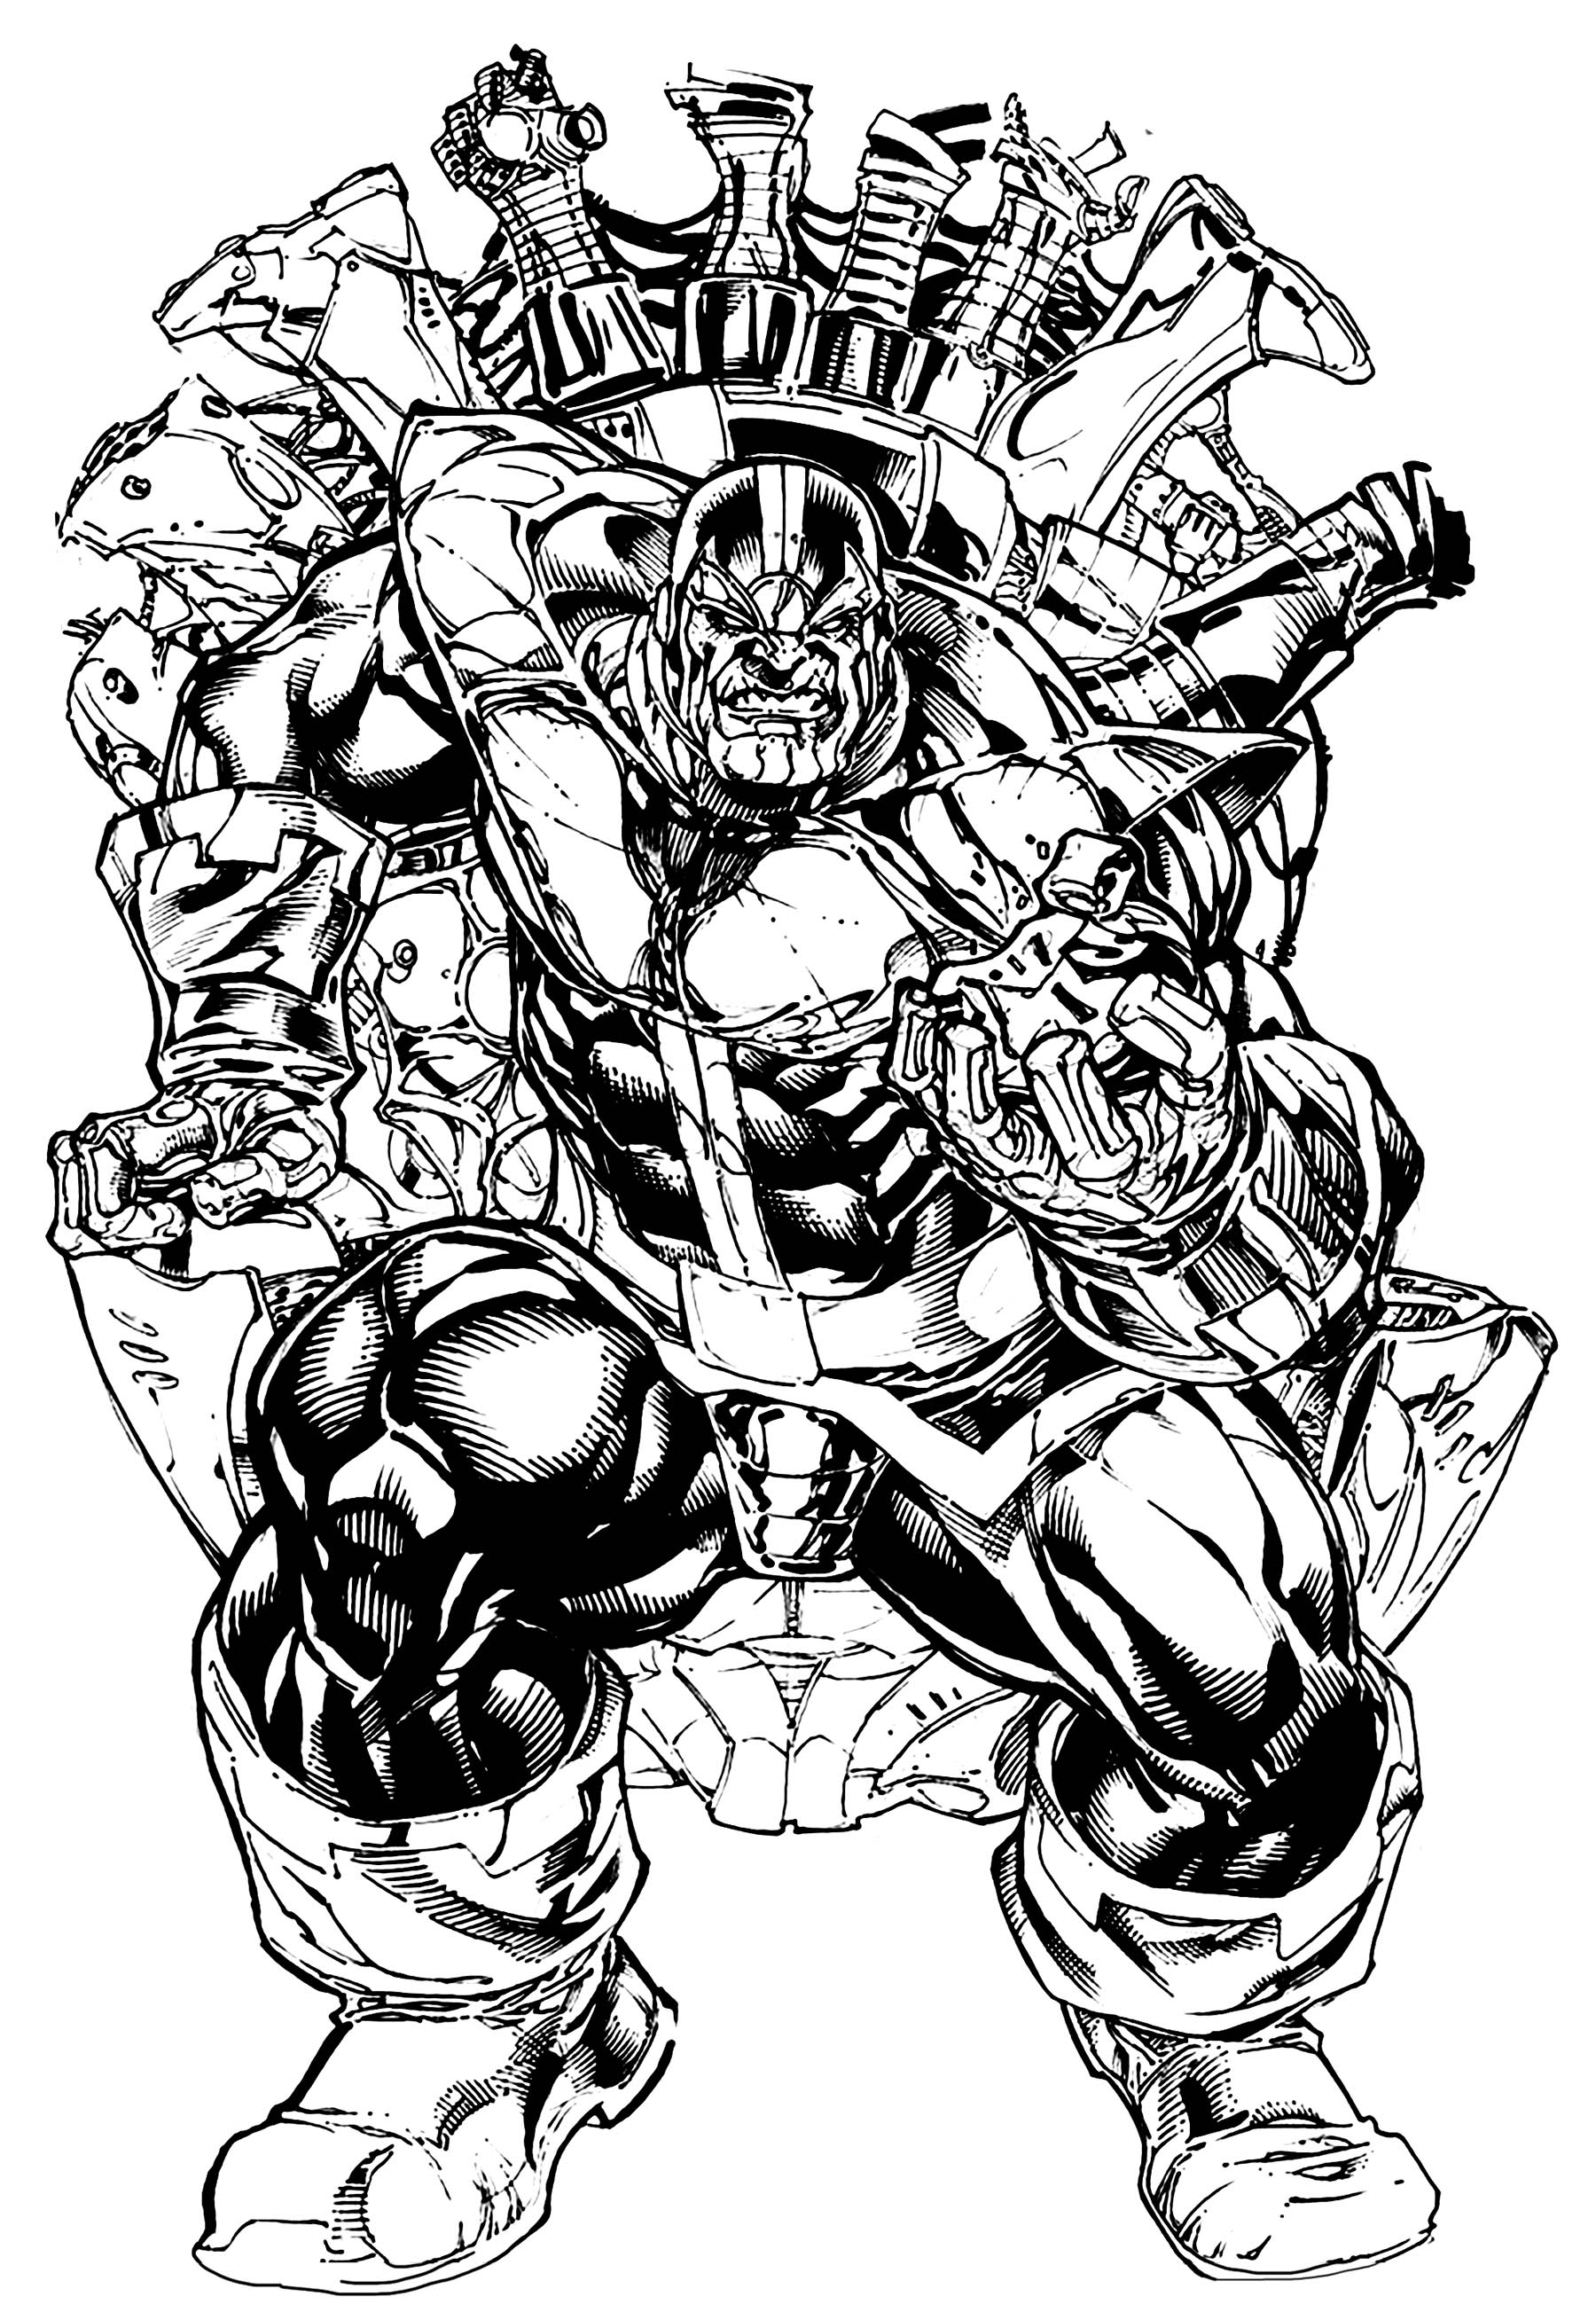 920 Top Avengers Coloring Pages For Adults , Free HD Download